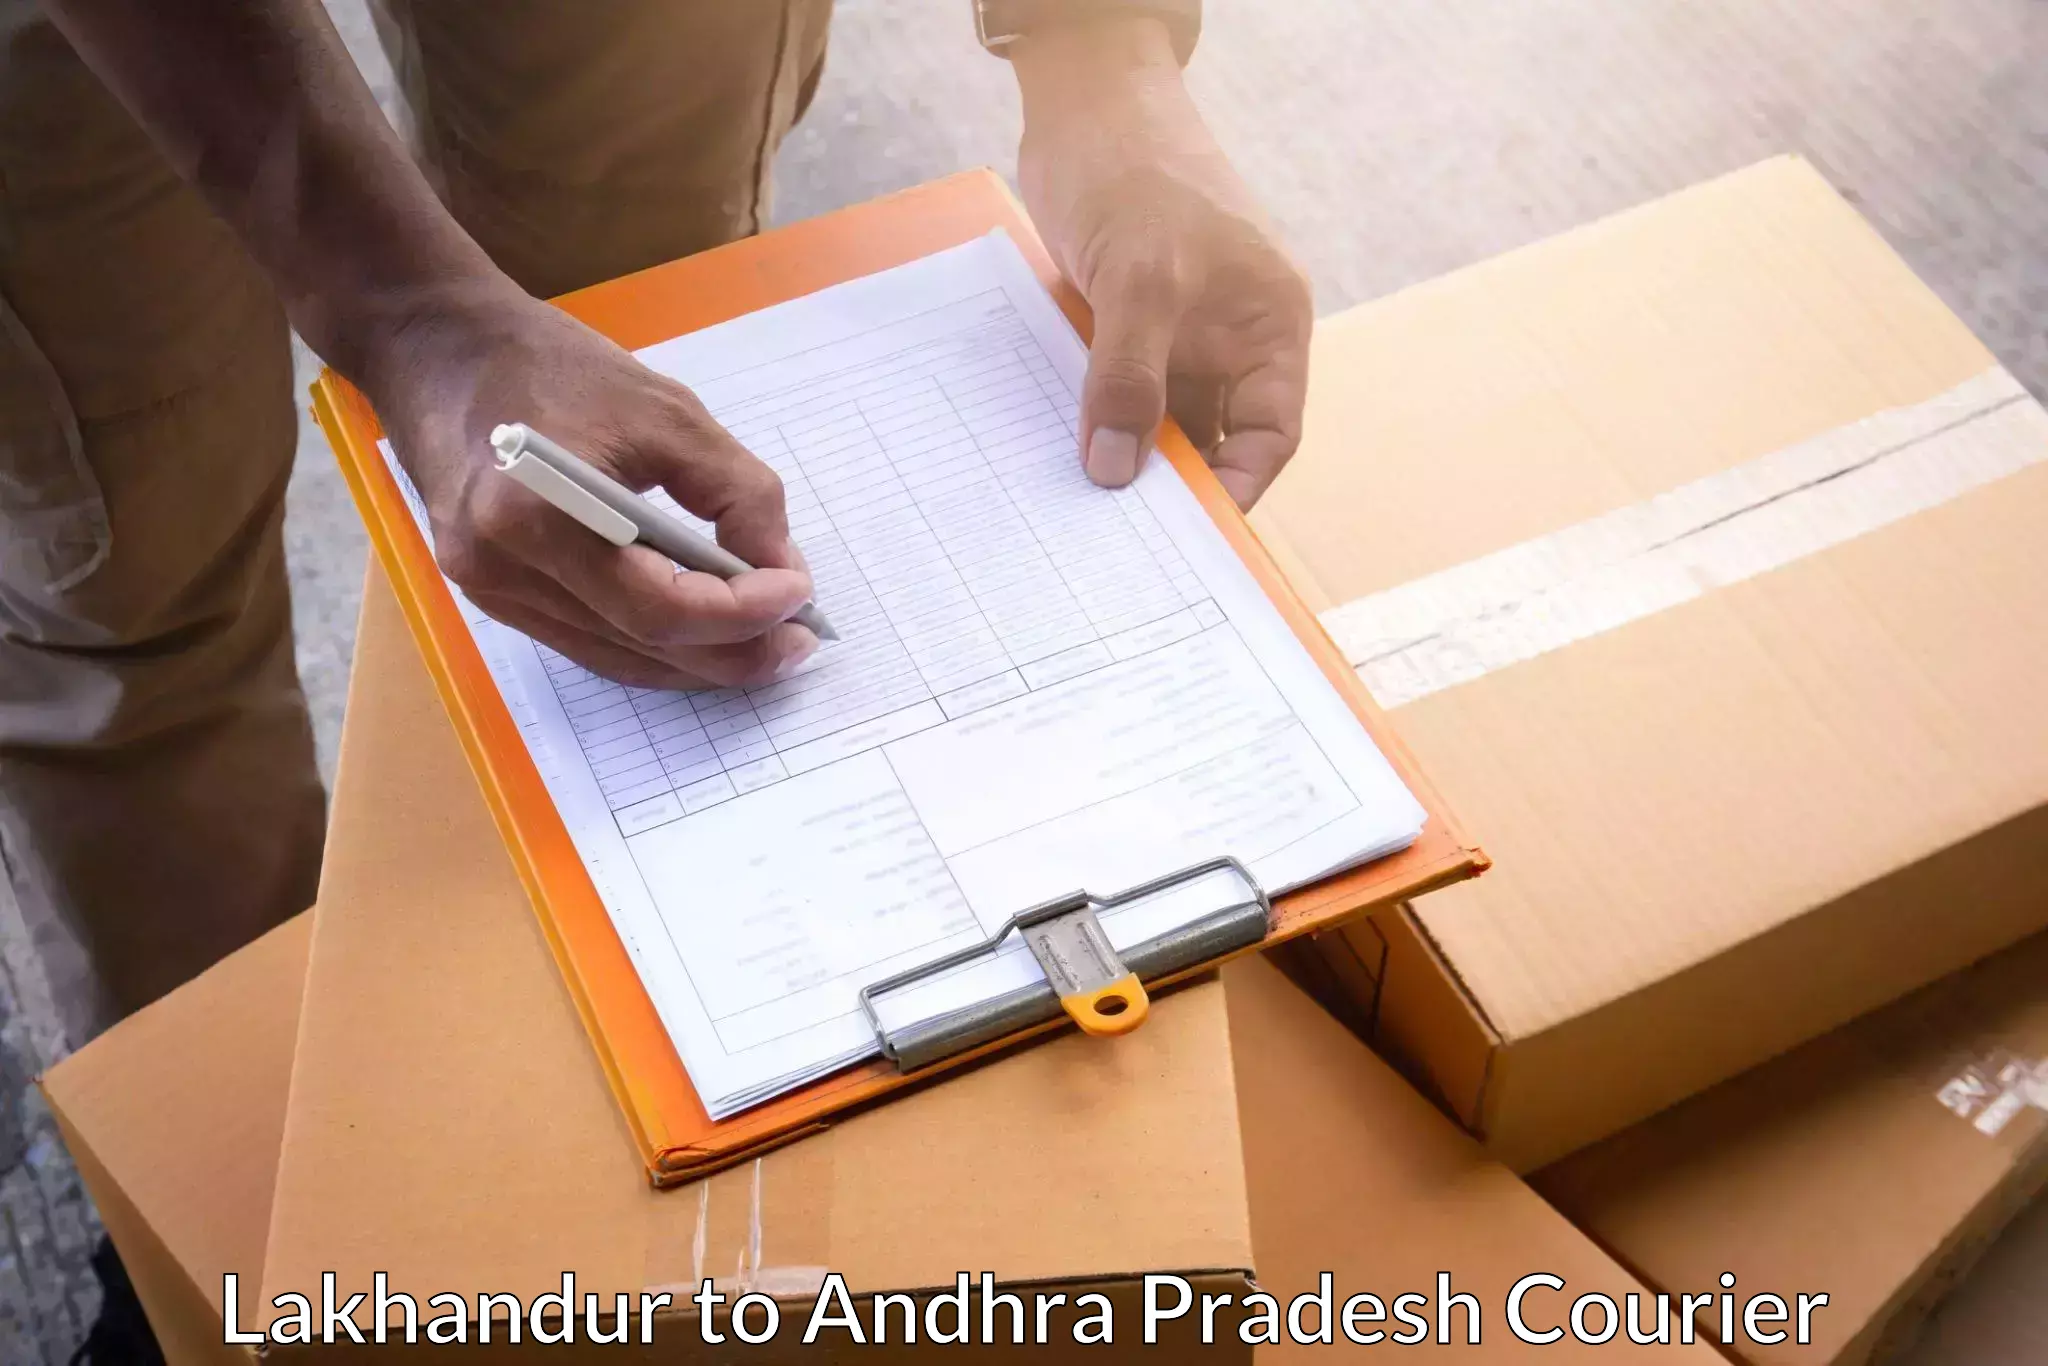 End-to-end delivery Lakhandur to Kathipudi